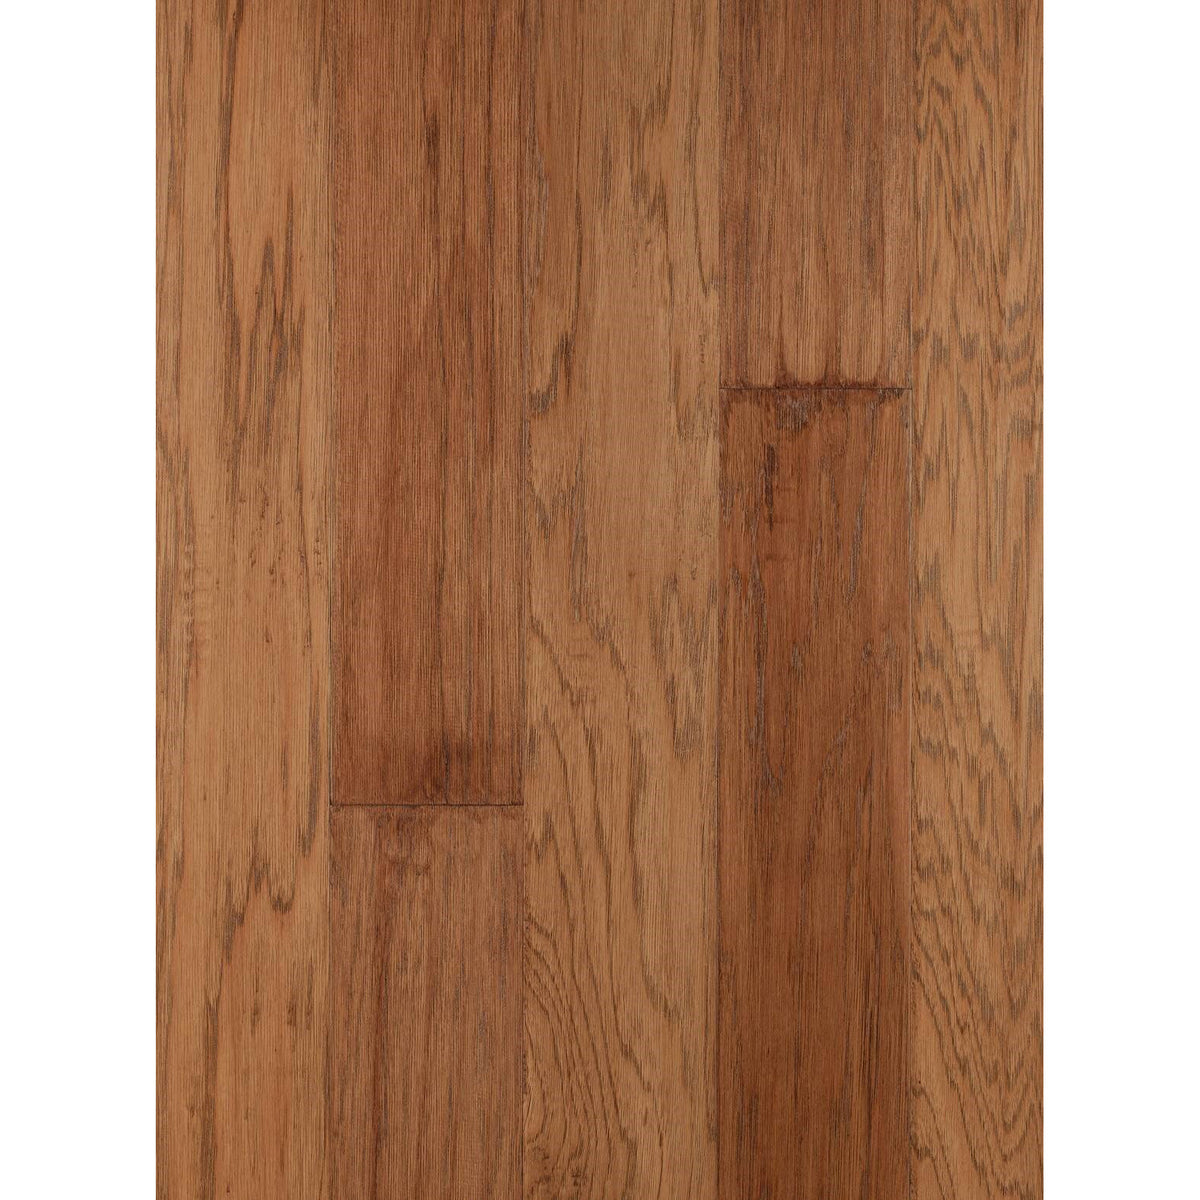 LM Flooring - River Ranch Collection - Barley Hickory